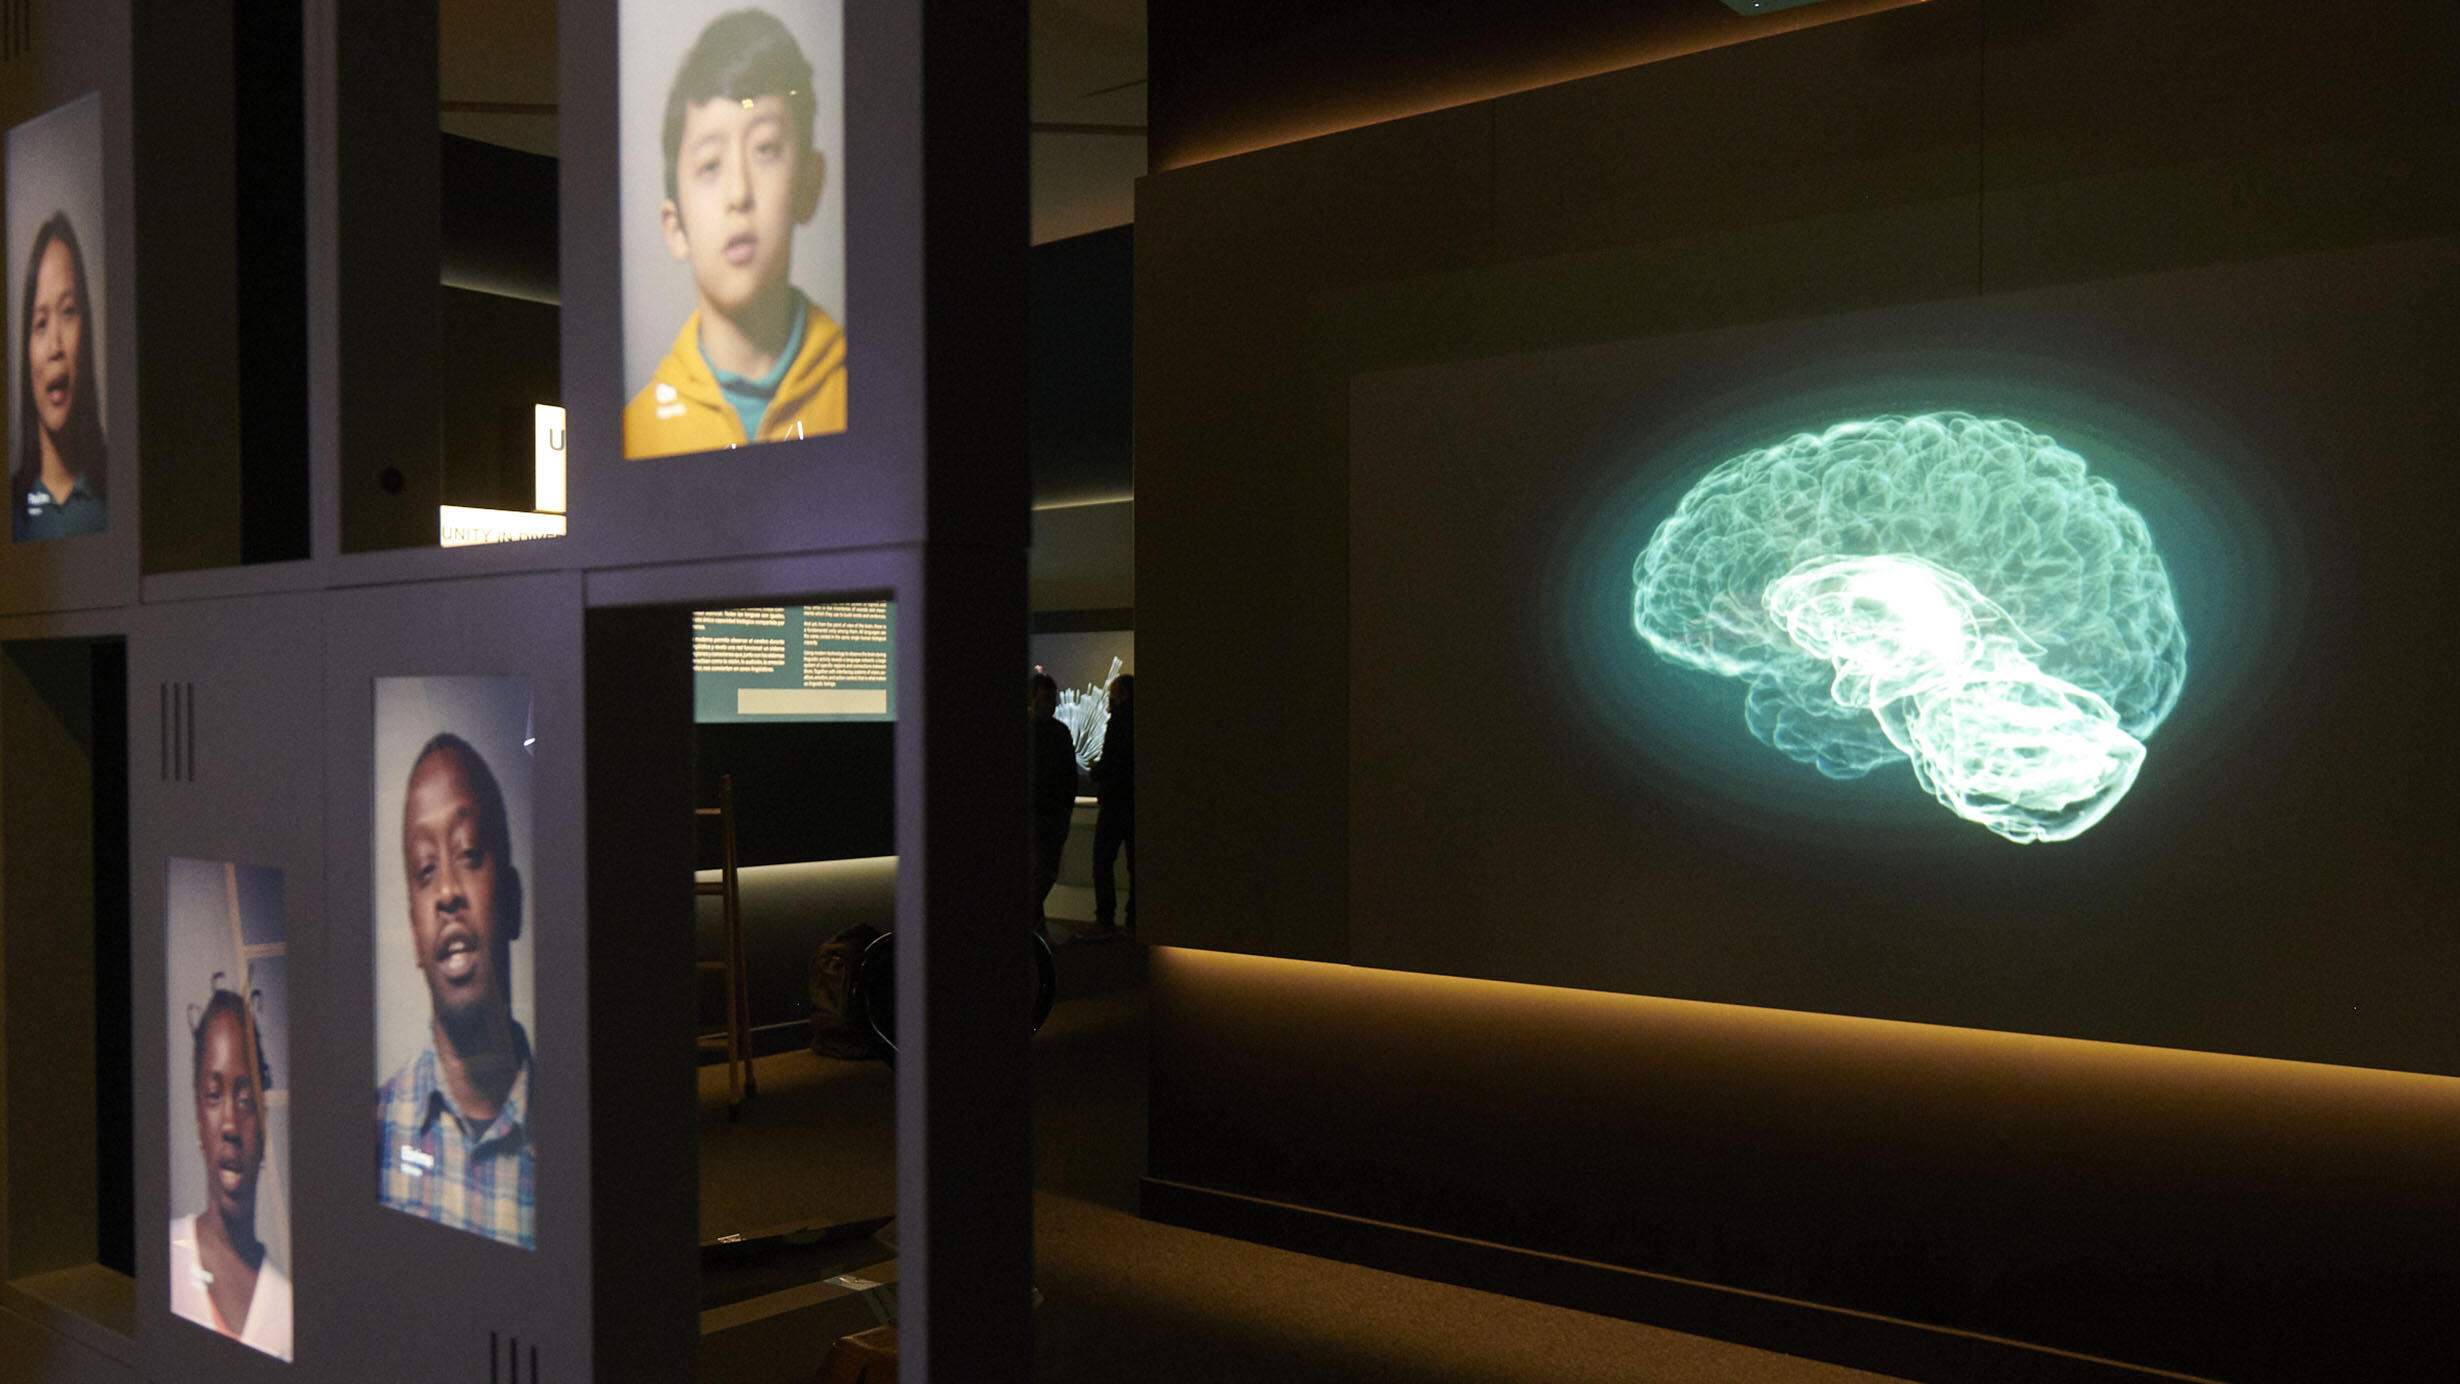 A screen displaying a digital image of a brain is juxtaposed next to a panel showing a collage of different faces.